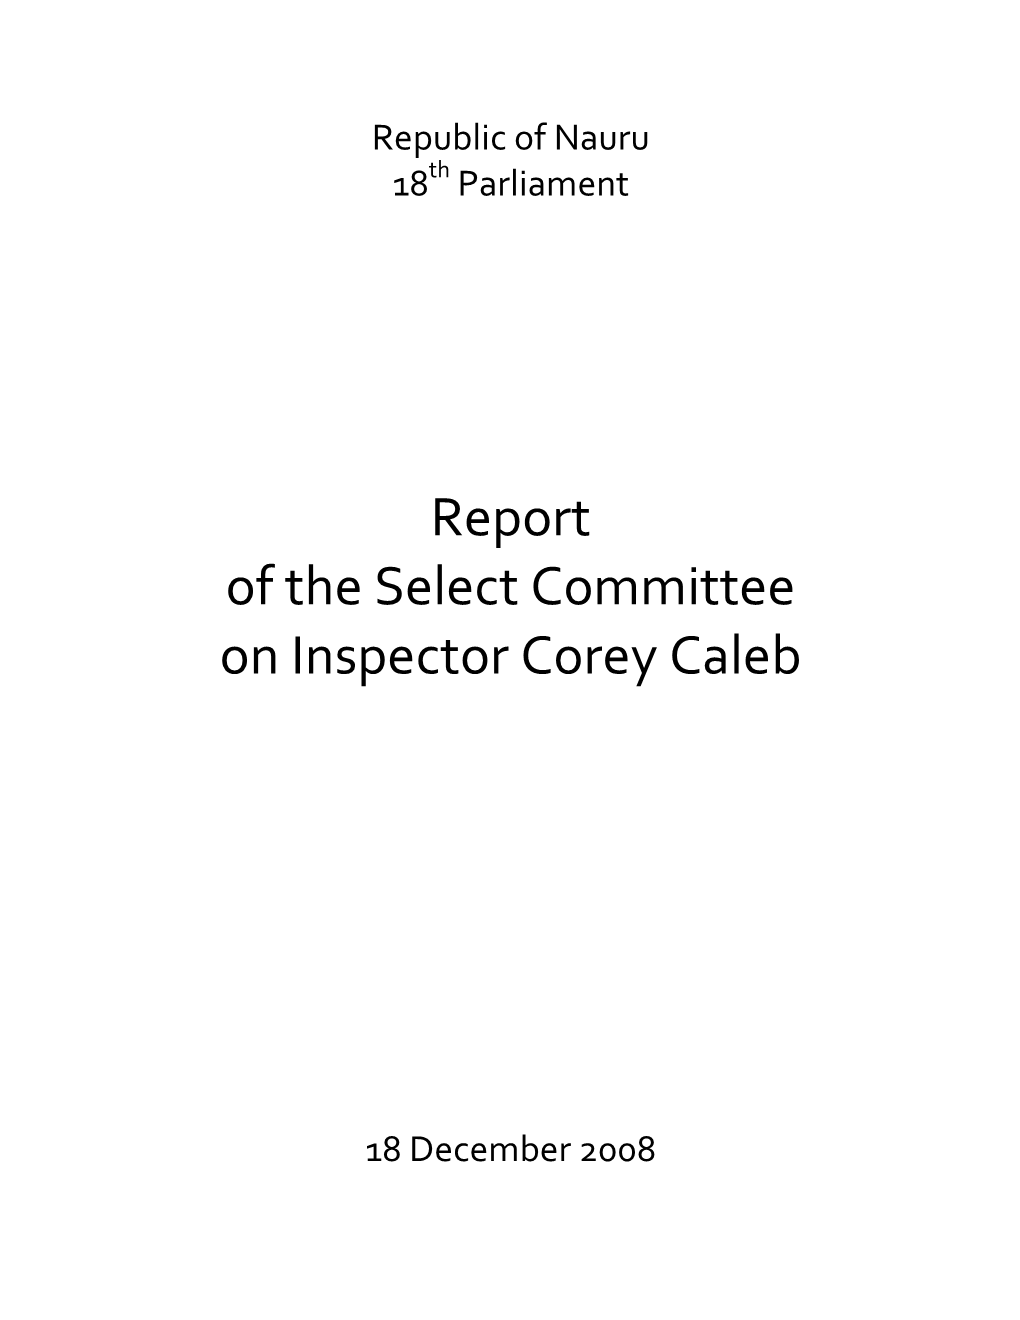 Report of the Select Committee on Inspector Corey Caleb